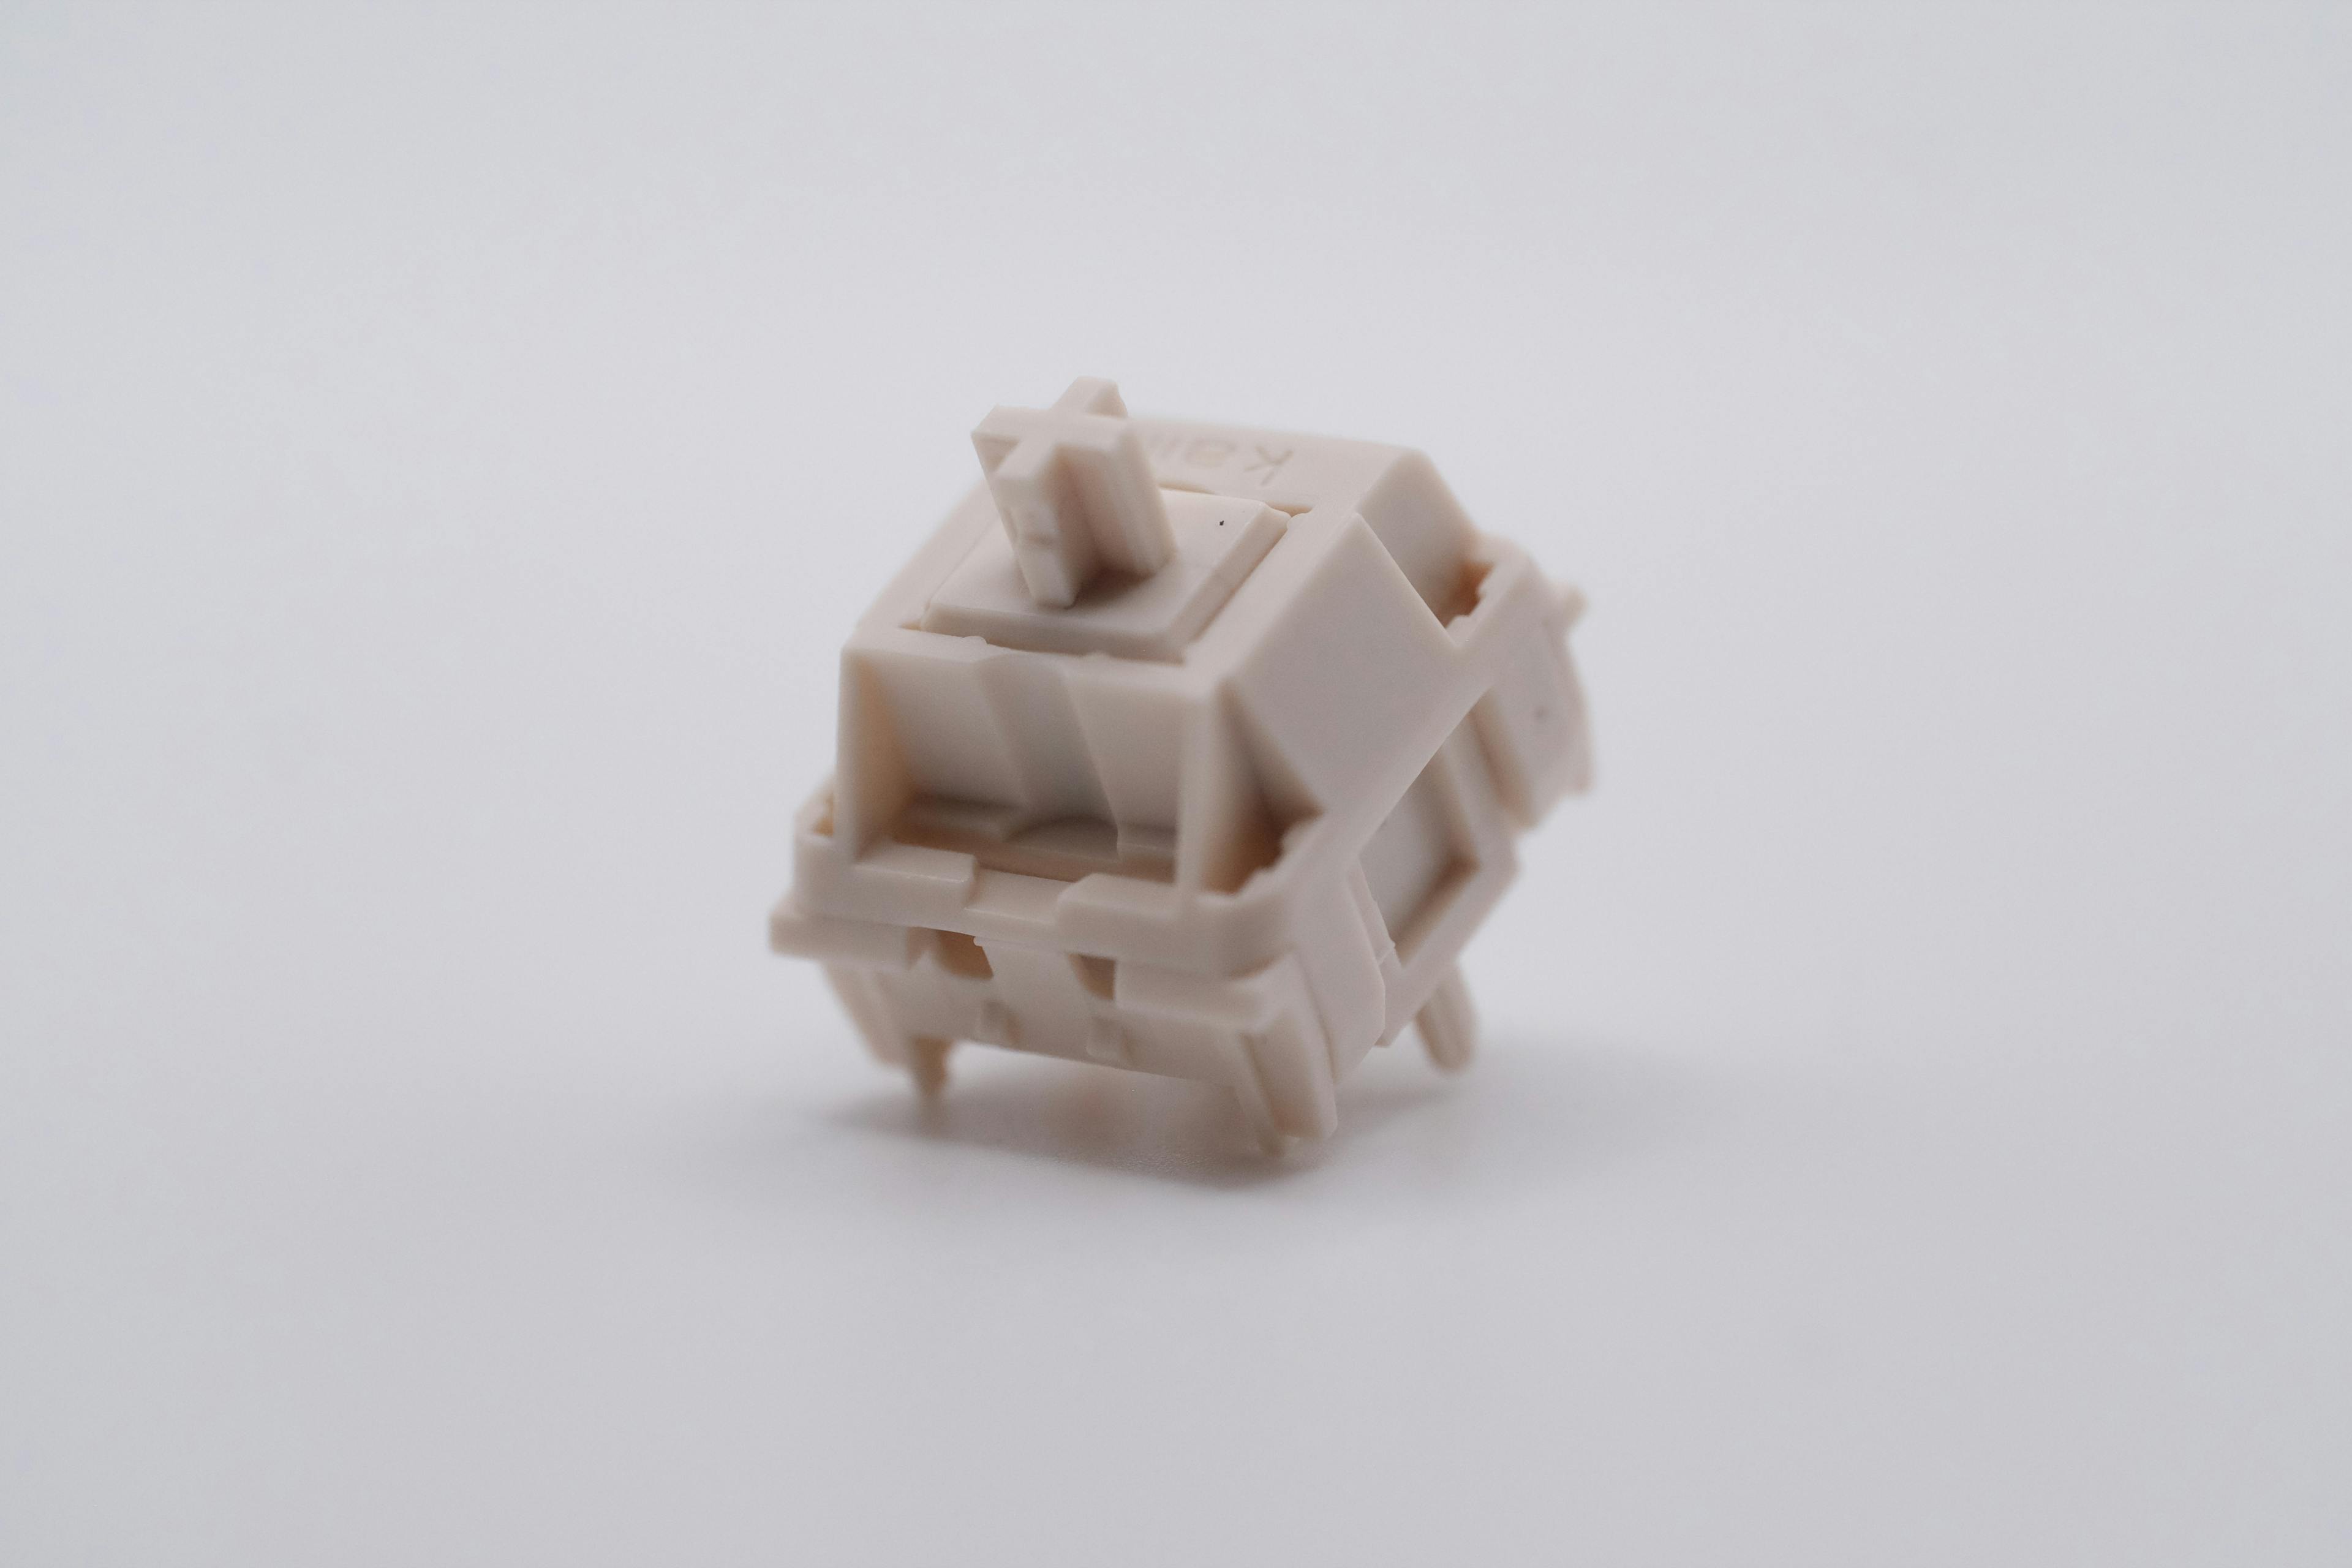 Kailh NovelKeys Cream Linear Switches